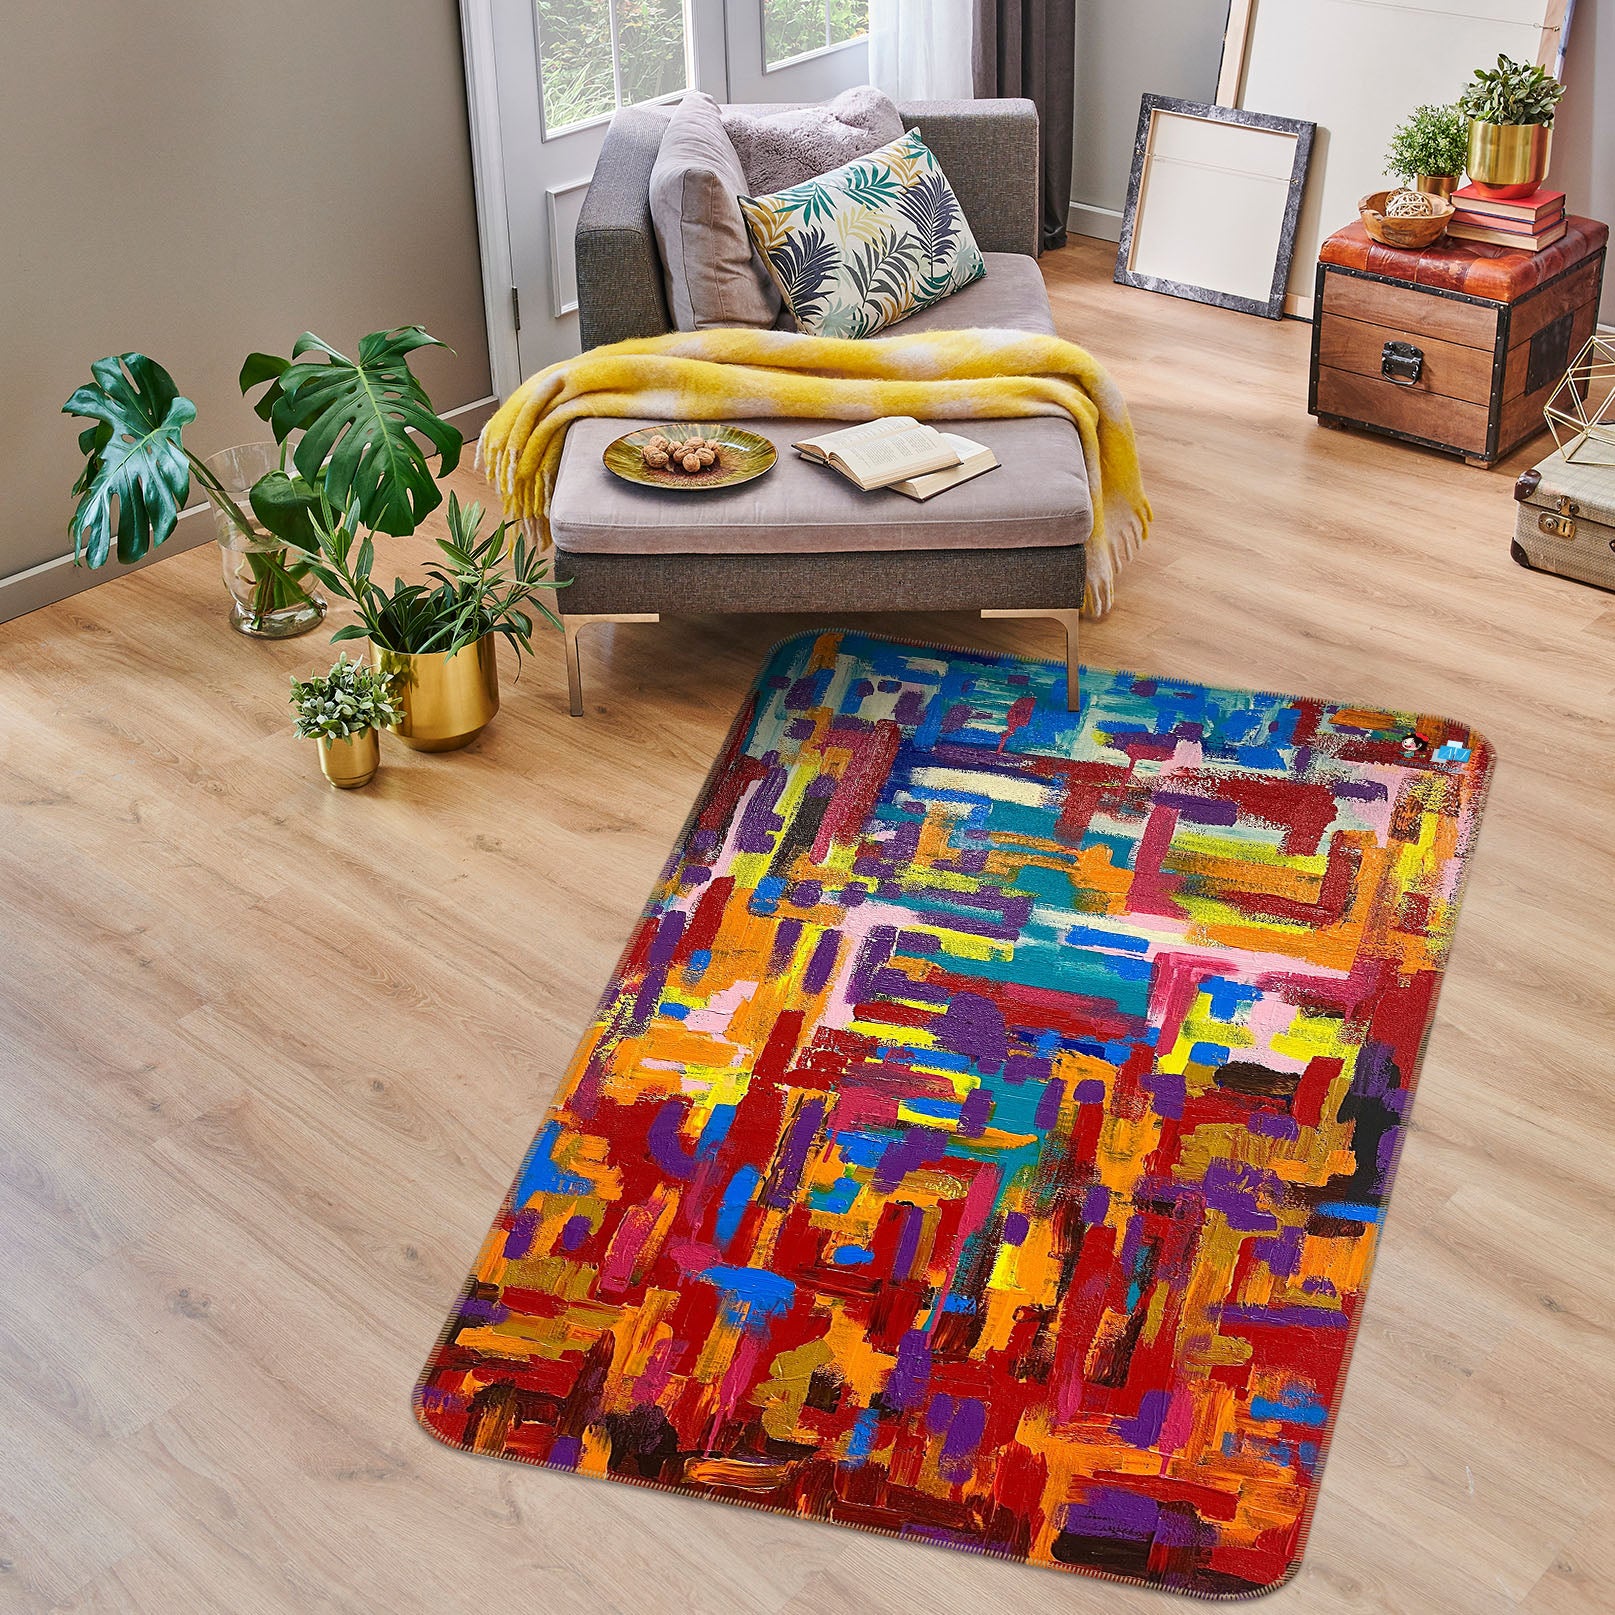 3D Color Painting 8225 Jacqueline Reynoso Rug Non Slip Rug Mat